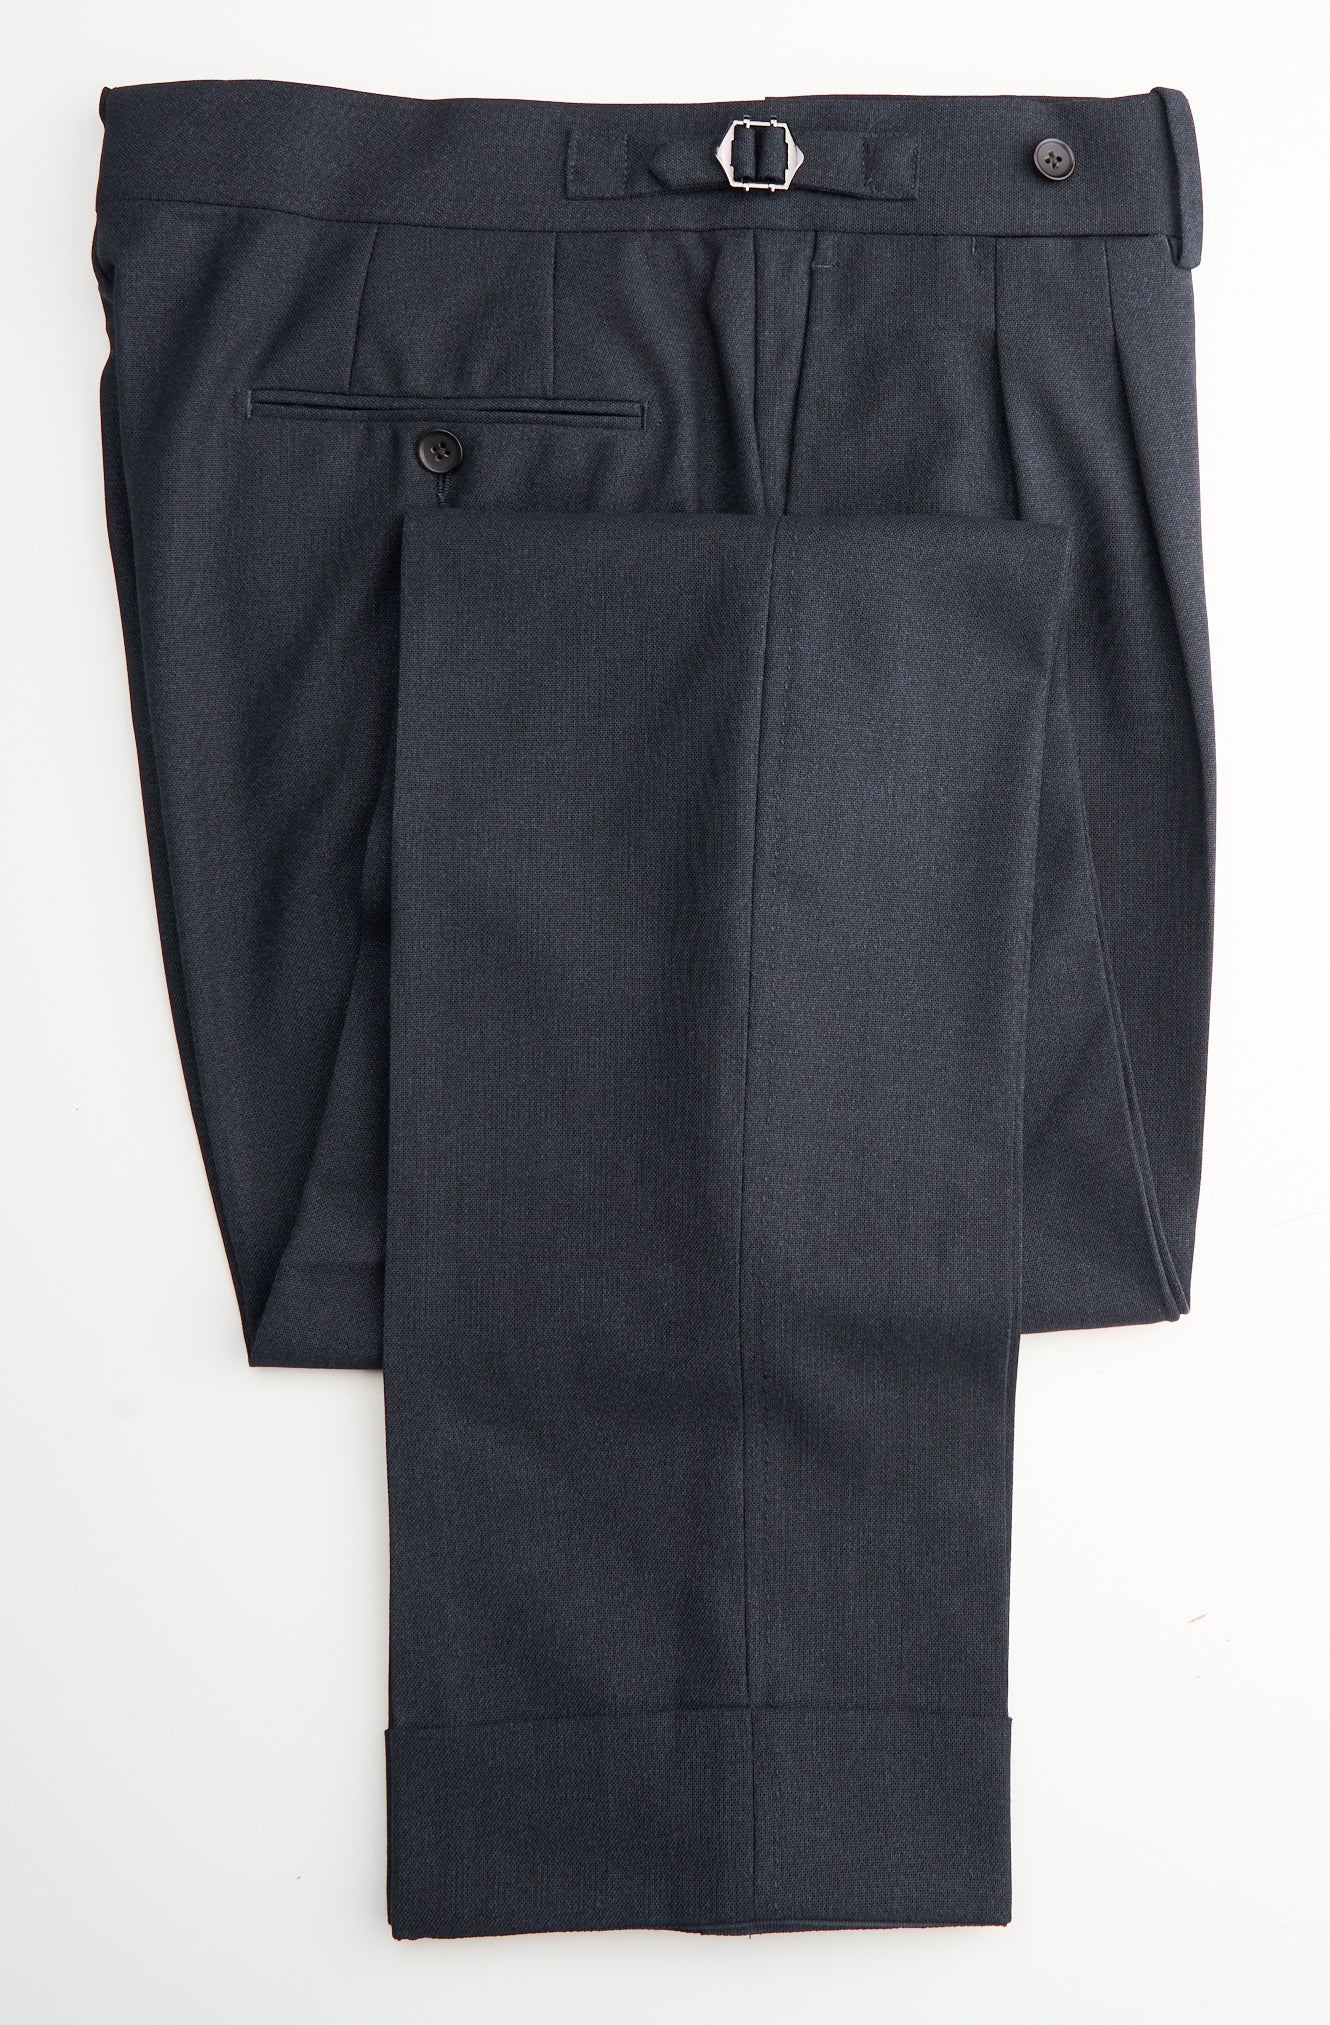 New Suitsupply Braddon Navy Blue Pure Wool 21 Micron 2 Ply Pants - Waist Size 34, 36, 38, 40